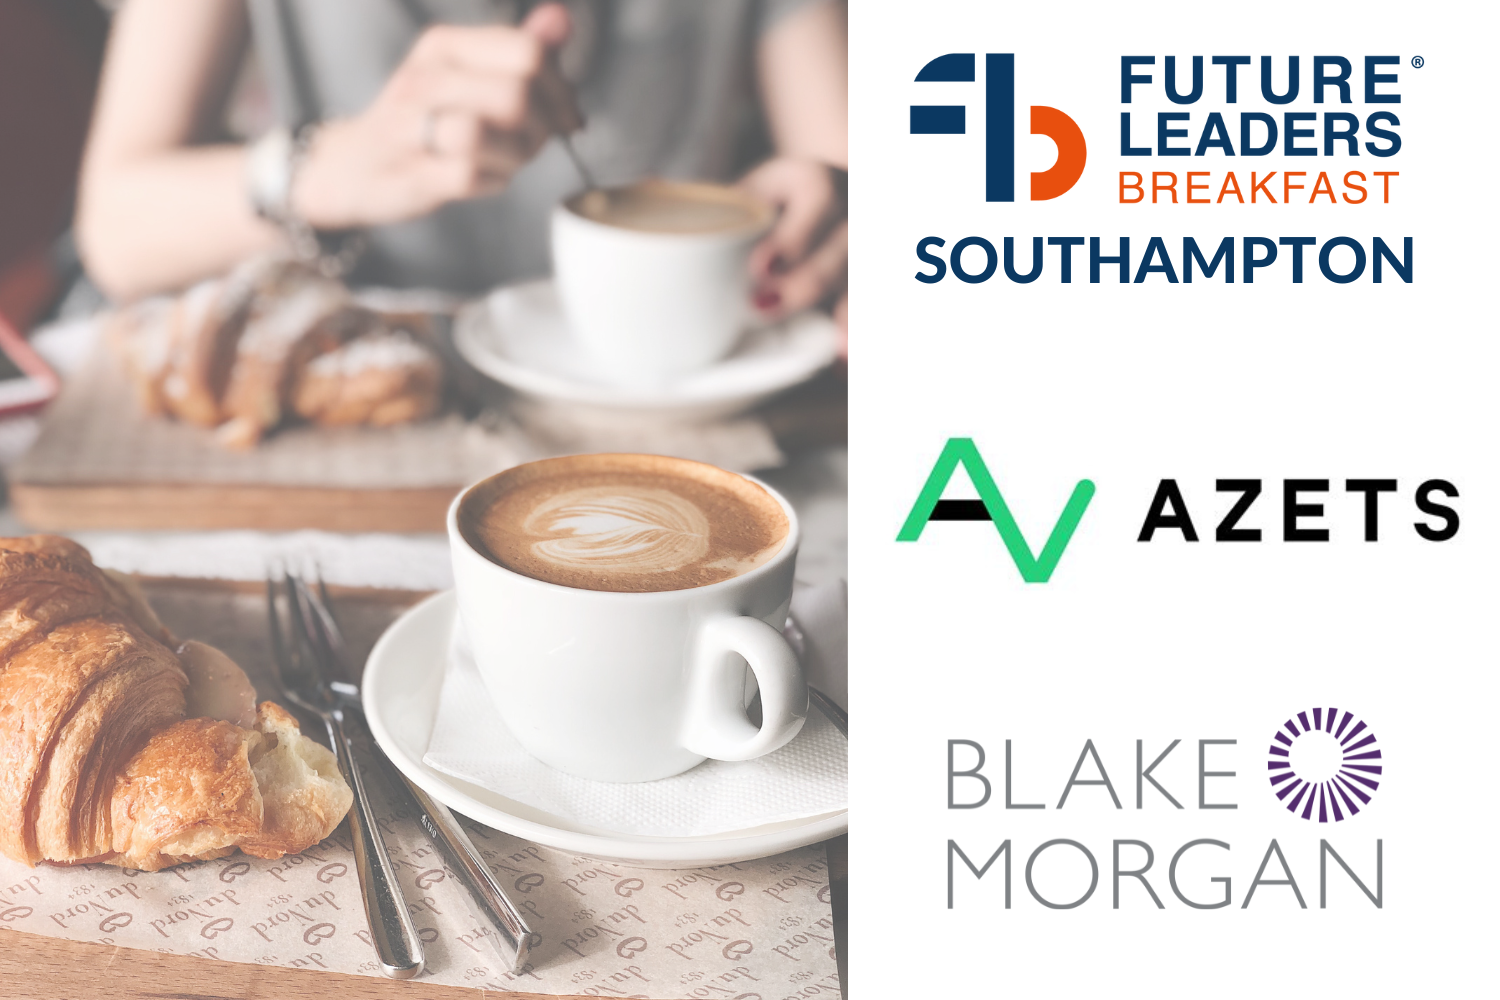 photo of woman in grey dress stirring cup of coffee in background, with pastries and another cup of coffee in foreground. To right of image are logos for Future Leaders Breakfast, Azets and Blake Morgan